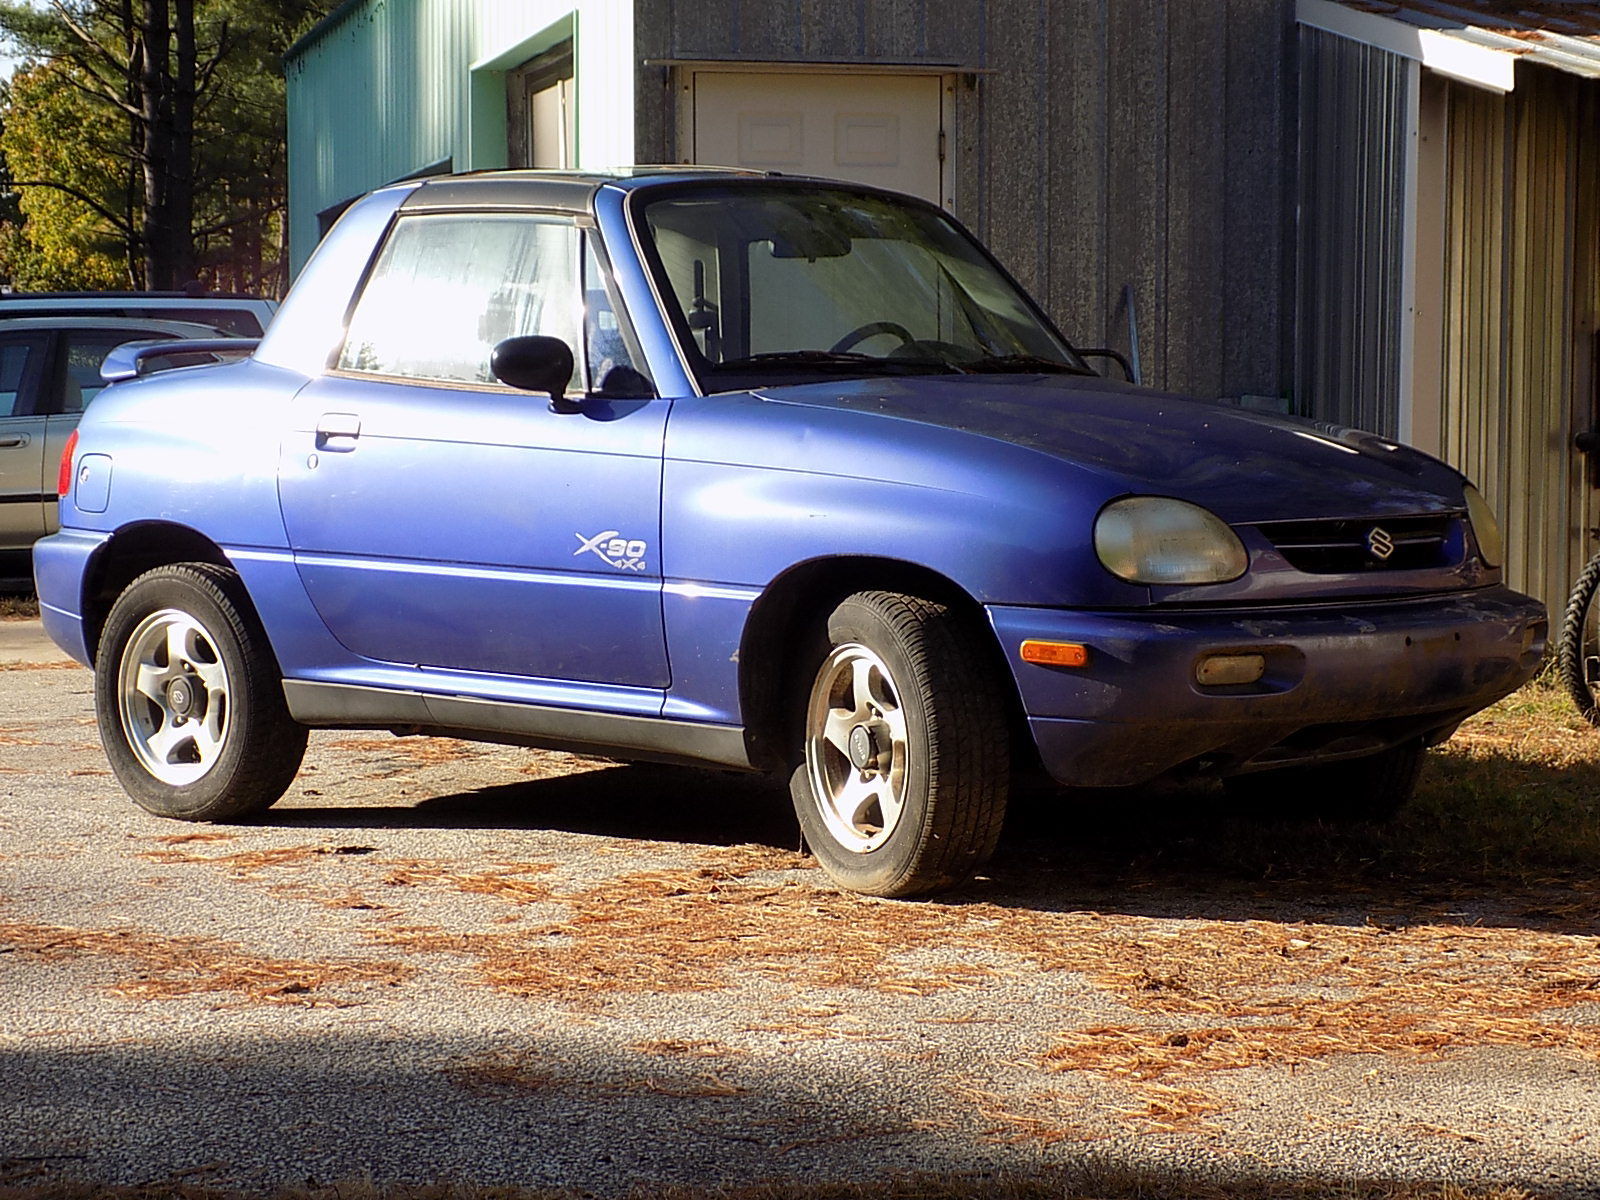 These Are The Most Pointless Cars You Can Buy On eBay Right Now